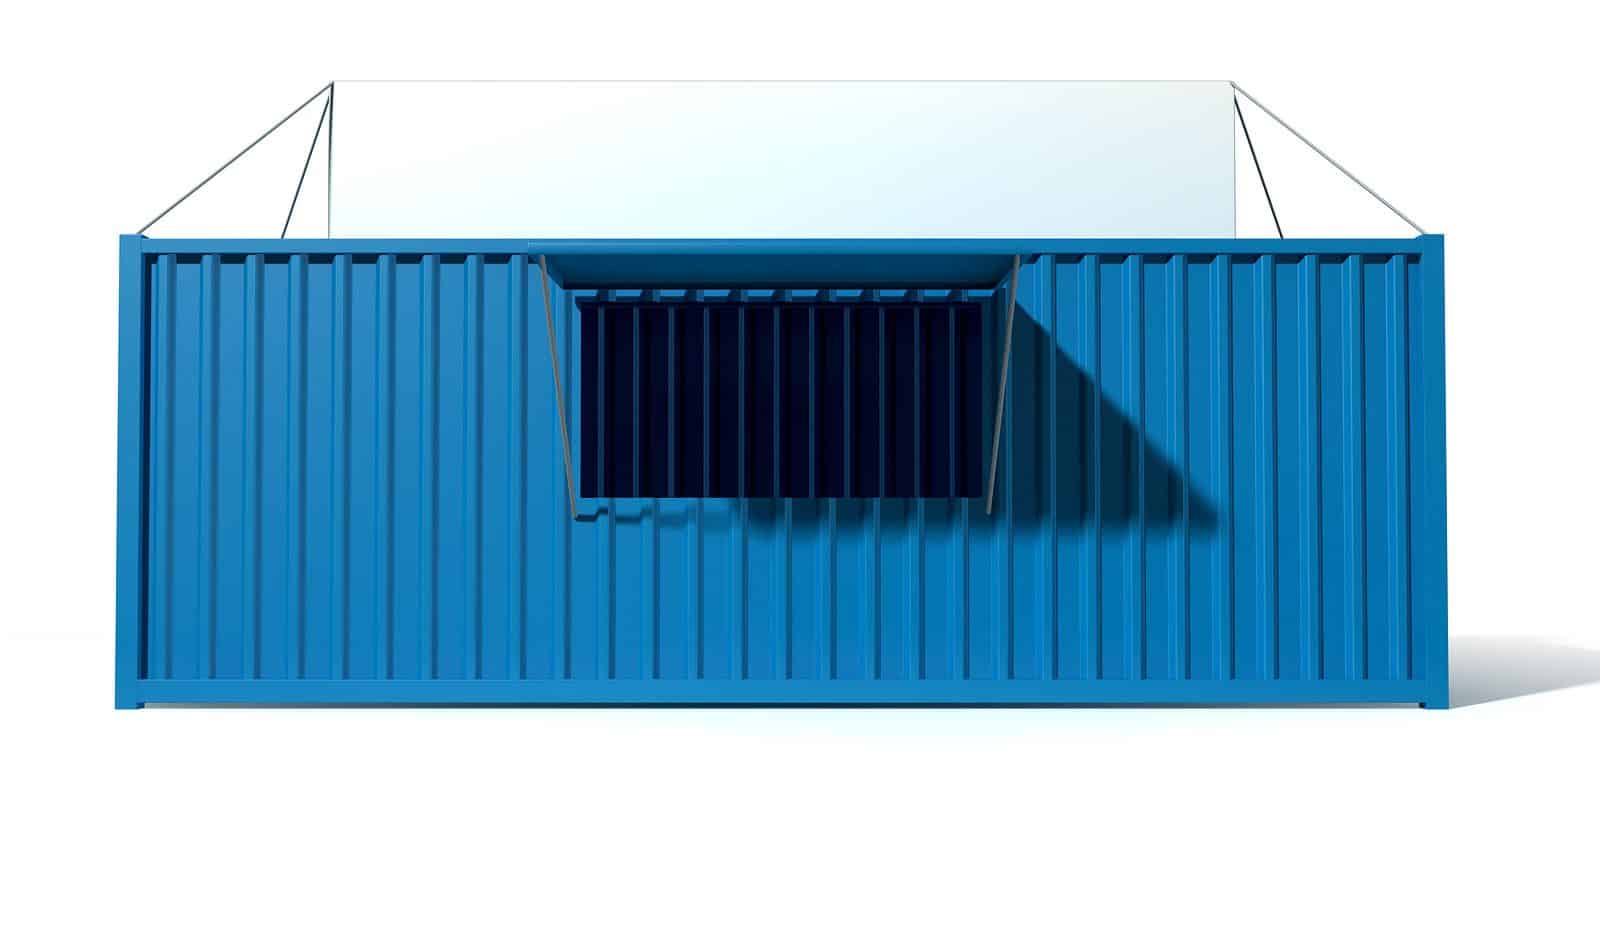 Storage Containers Let You to Find the Best Location for Your Business